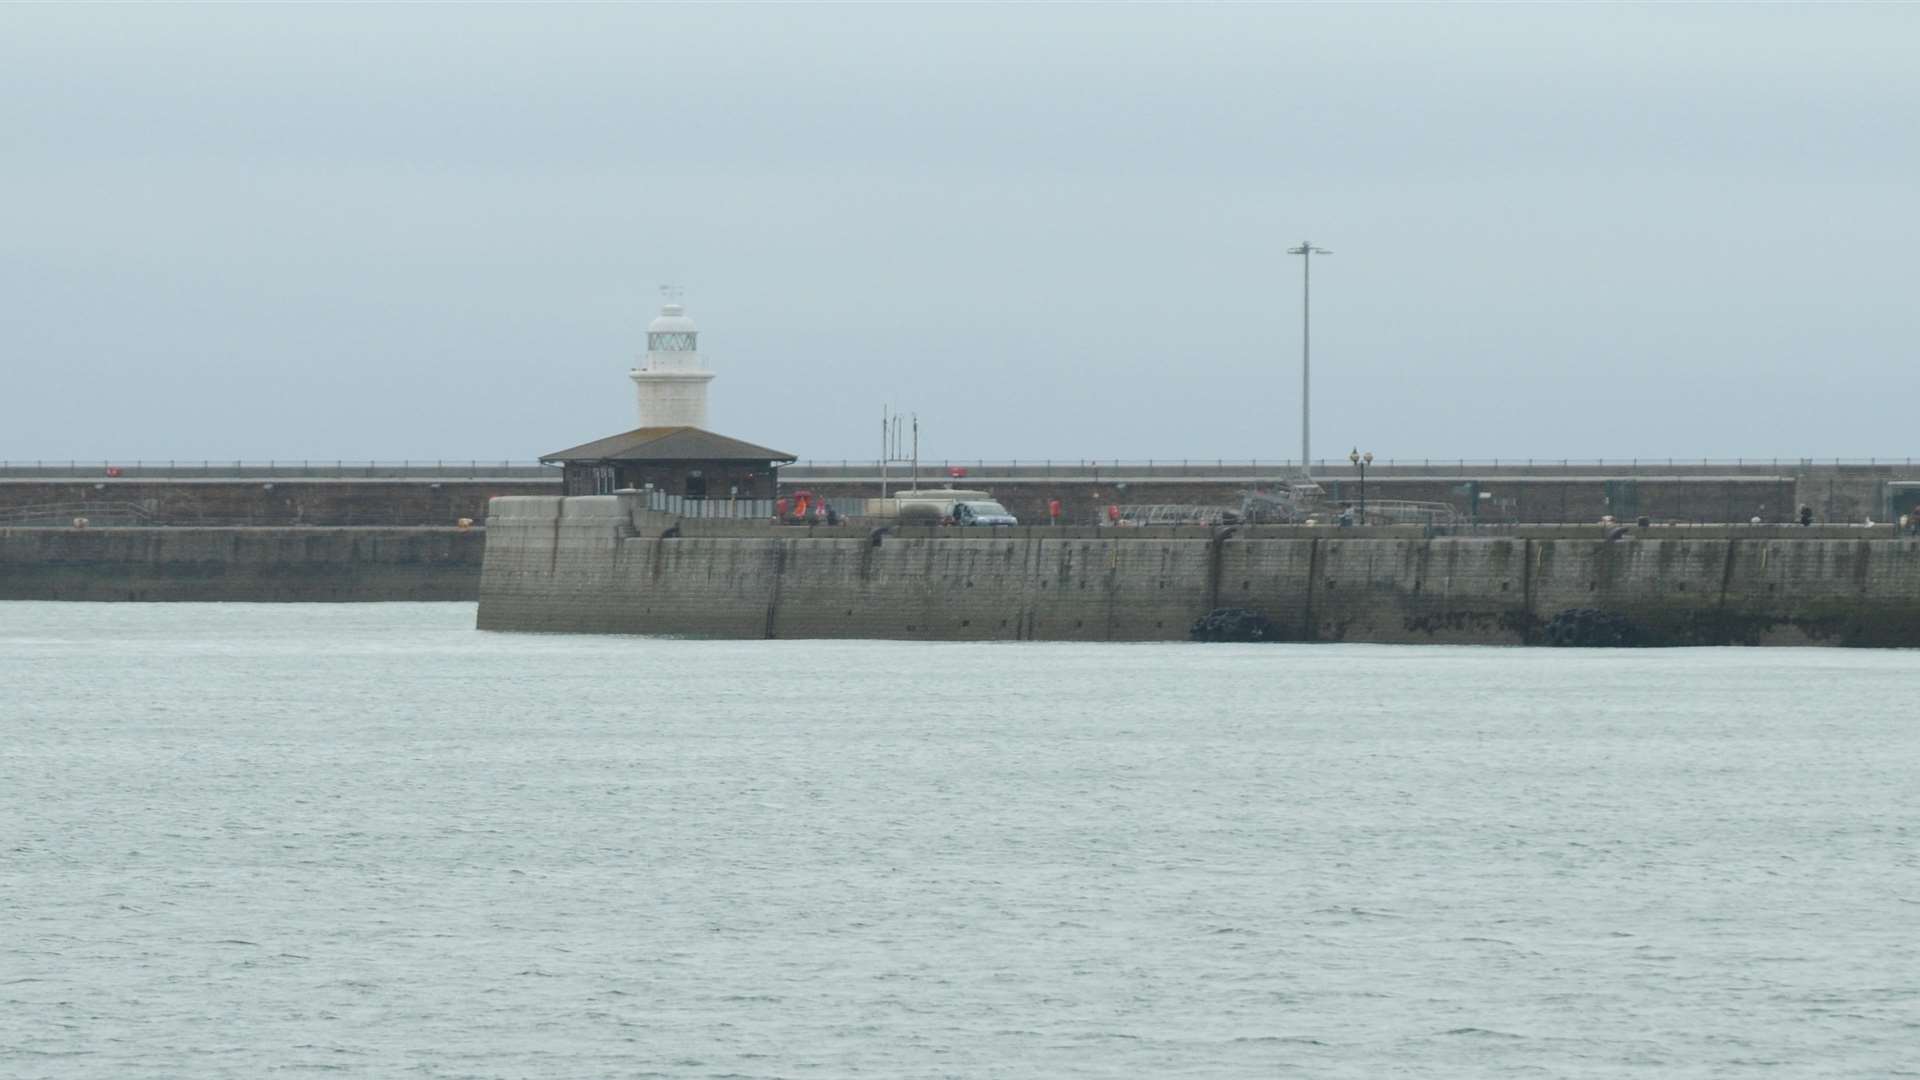 The Prince of Wales pier